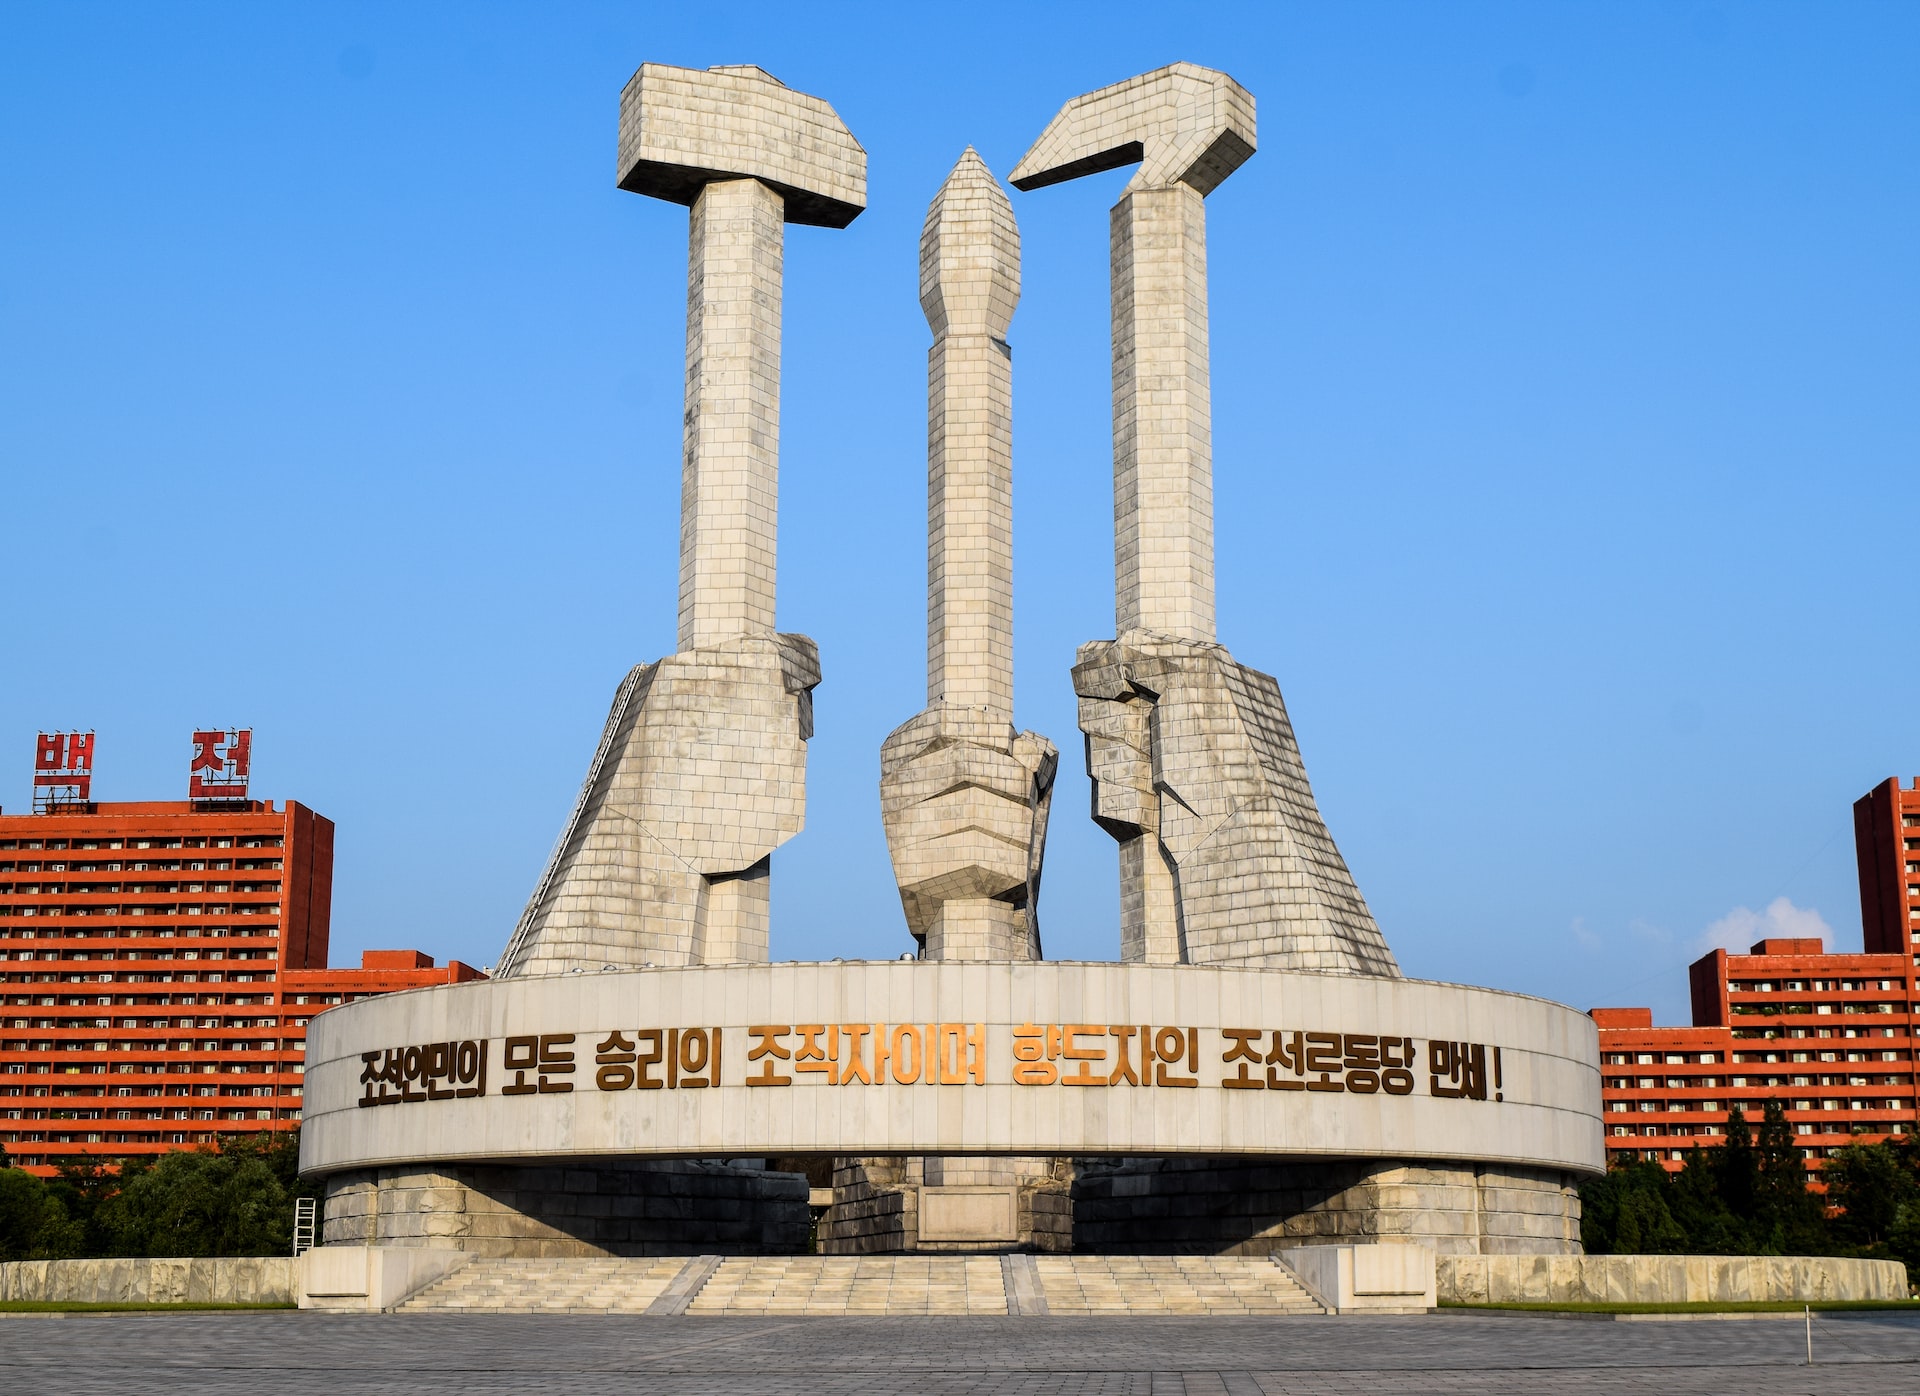 North Korea’s Monument to Party Founding showing a massive granite hammer, sickle and calligraphy brush in Pyongyang